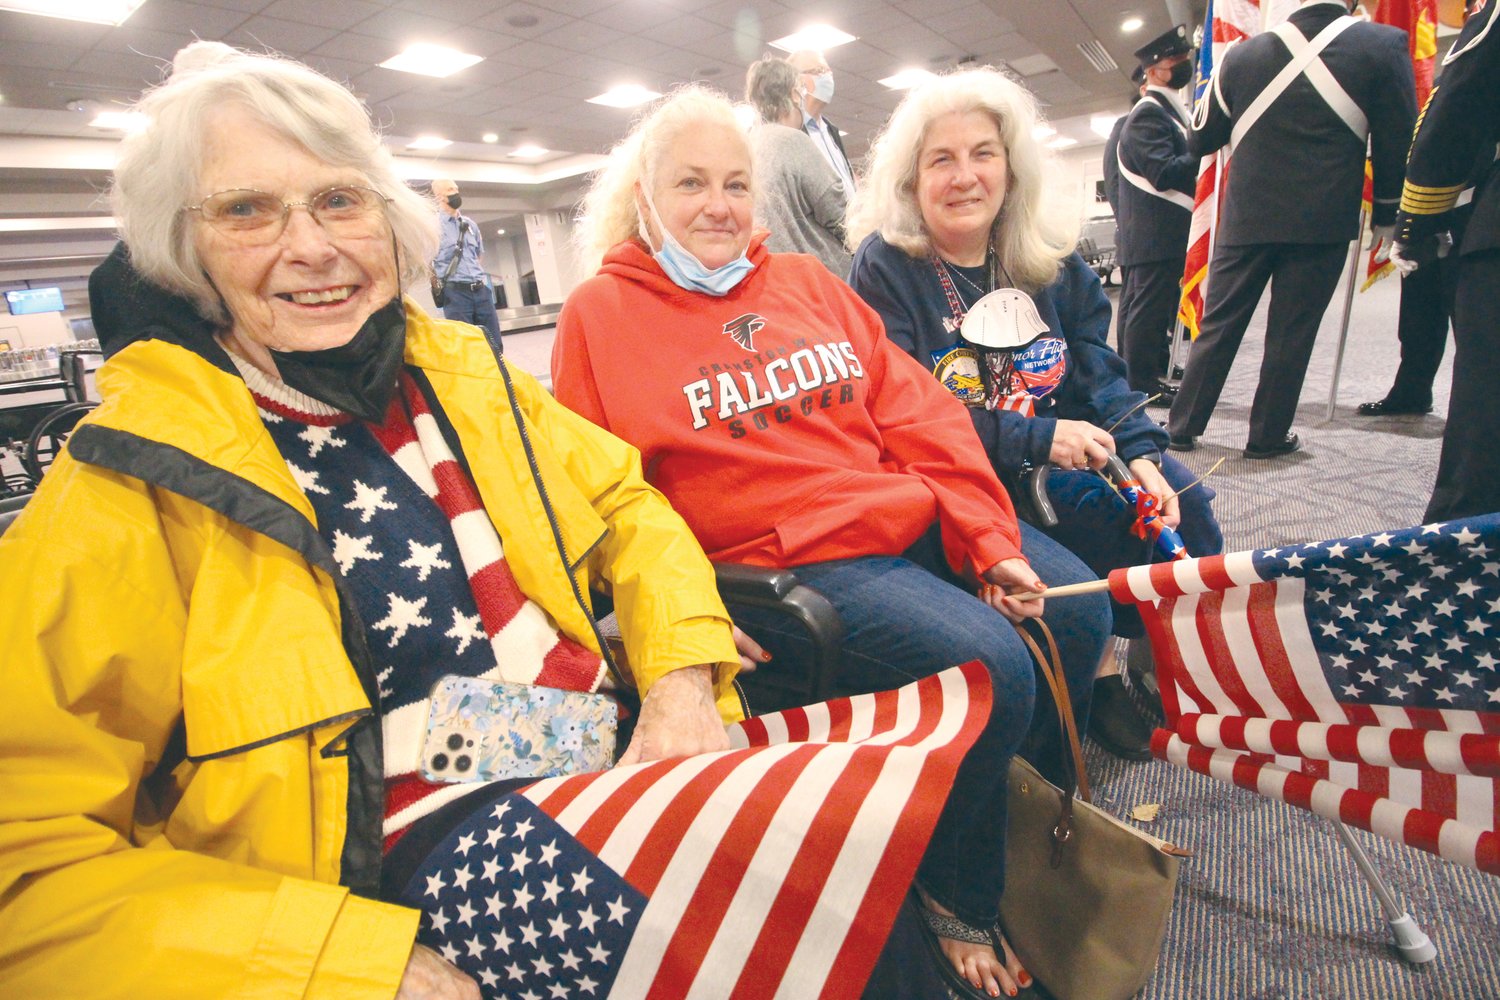 CHEERING SQUAD: Sandy Alling and her daughters
Judi Sherwood and Nancy Khanjari were among the
more than 150 people who turned out at Rhode Island
International Green Airport to send off Saturday’s Honor
Flight at 5:30 a.m. Sandy’s husband, Richard, served
in Vietnam and in the words of his daughters “we are
Army brats.” The Allings live in Cranston